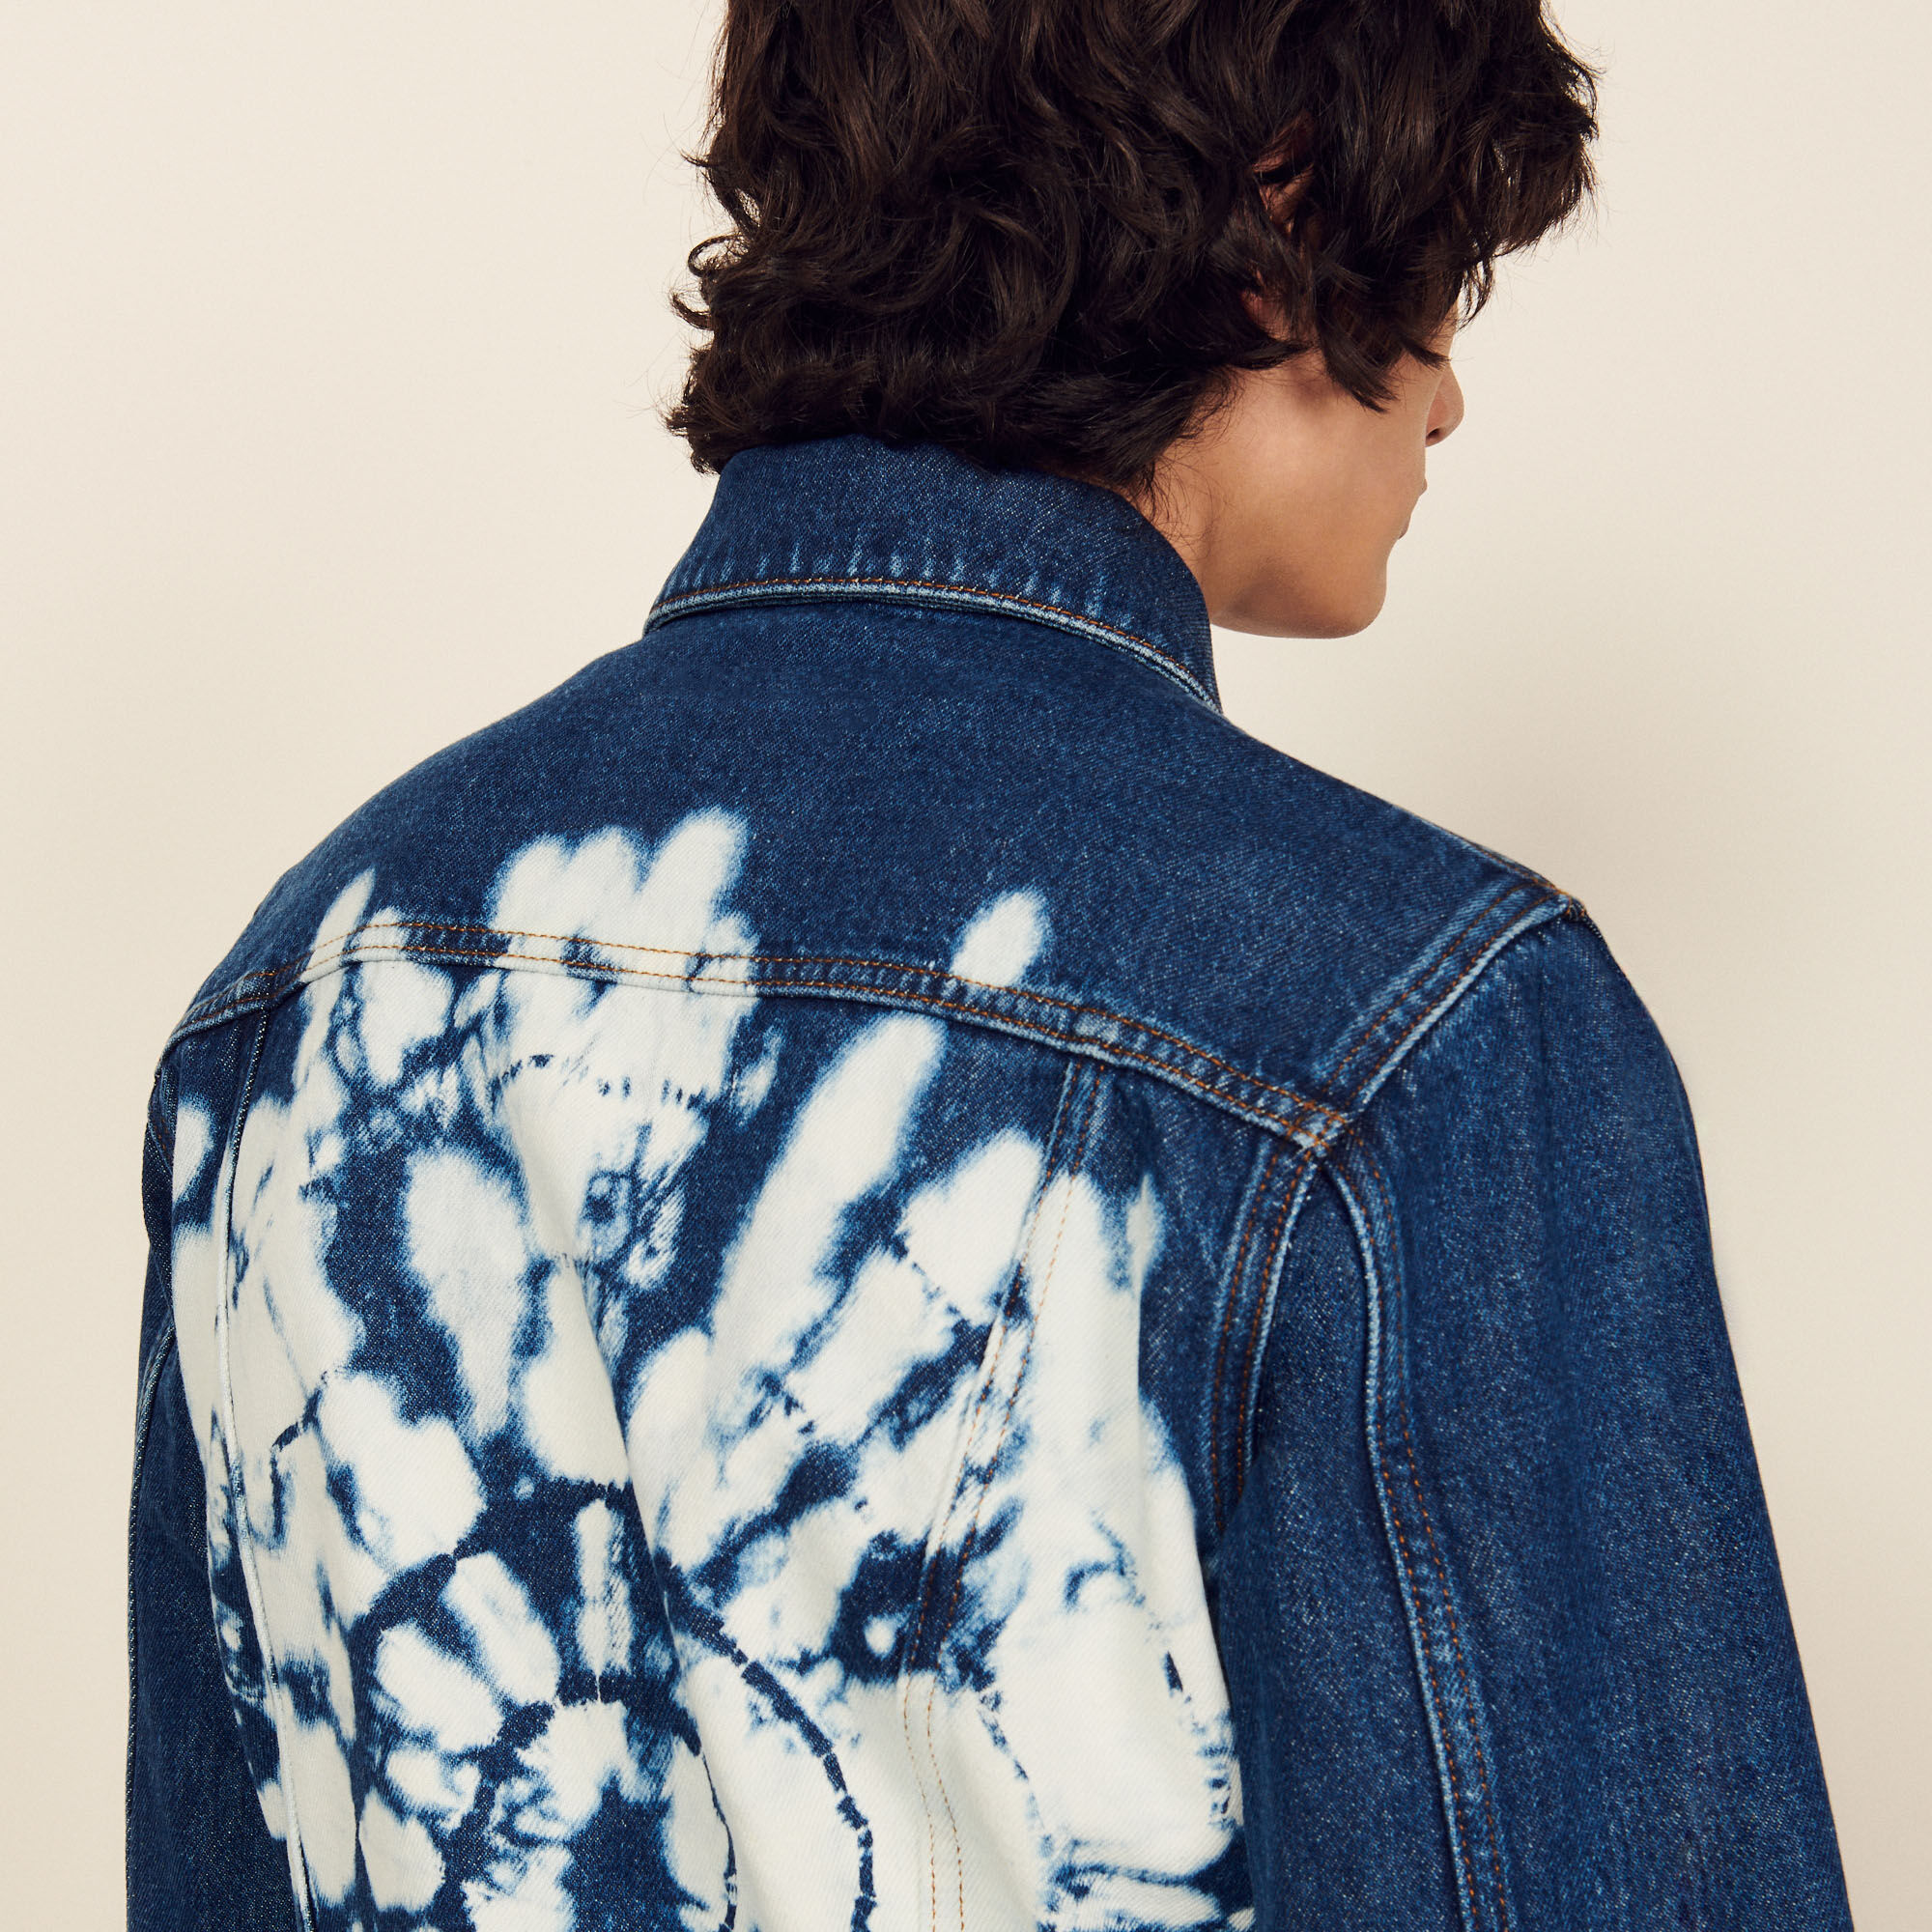 Denim jacket with tie-dye back Select a size and Login to add to Wish list